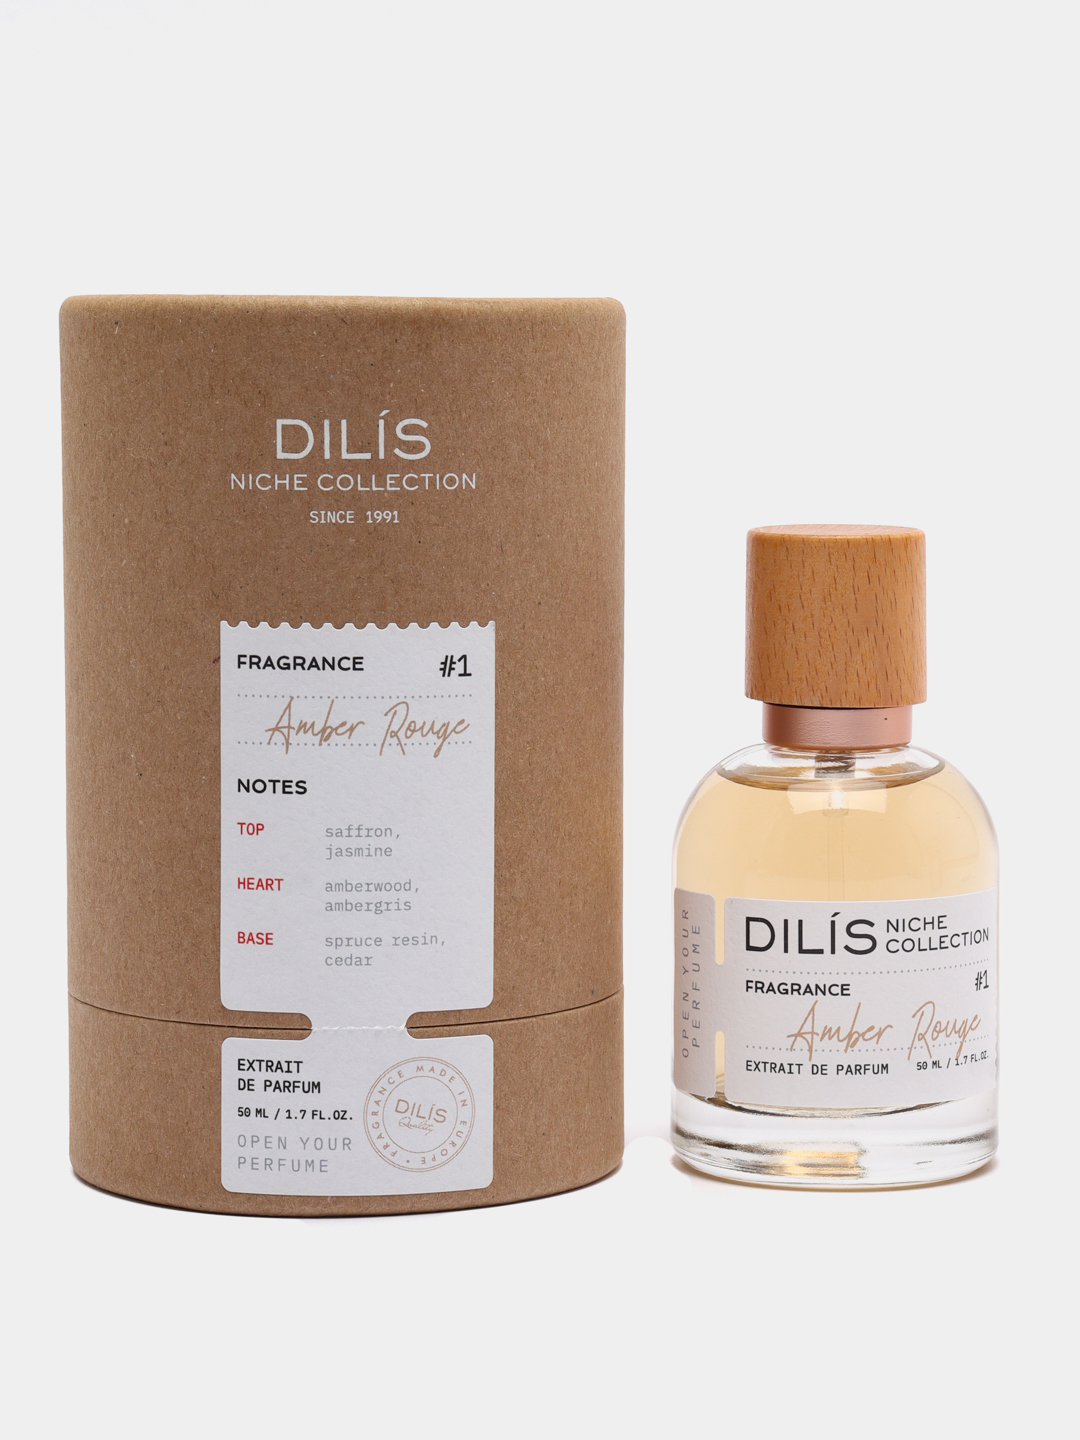 Духи Dilis Niche collection. Dilis Niche collection Amber rouge. Dilis Pink Pepper 3 духи 50 мл. Dilis Amber rouge духи. Духи niche collection